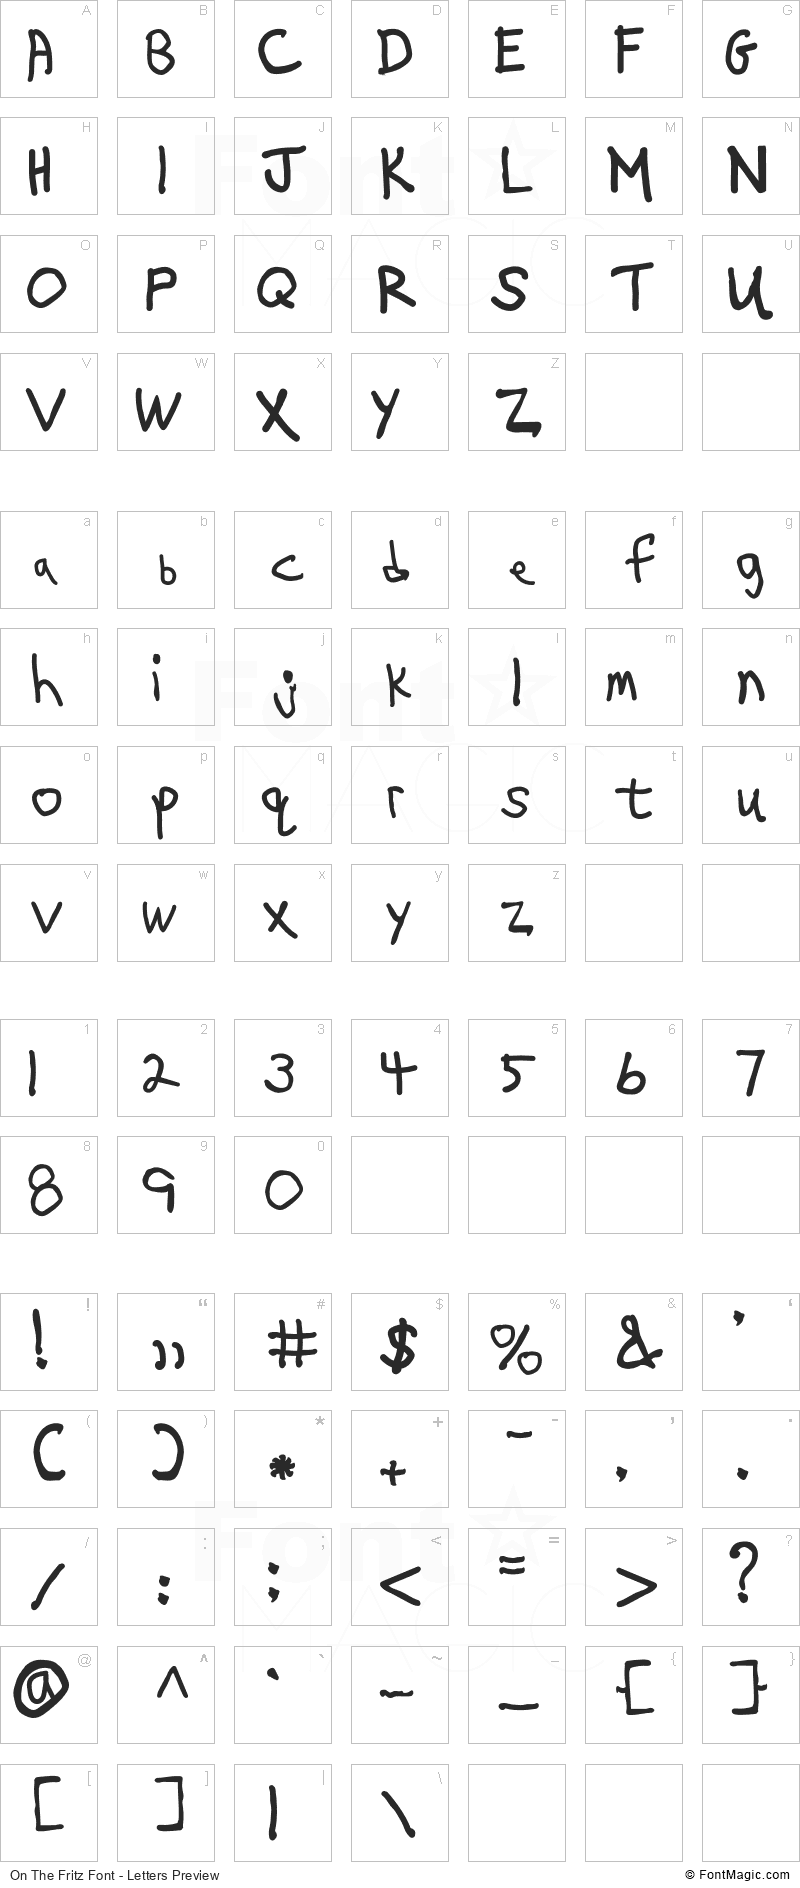 On The Fritz Font - All Latters Preview Chart